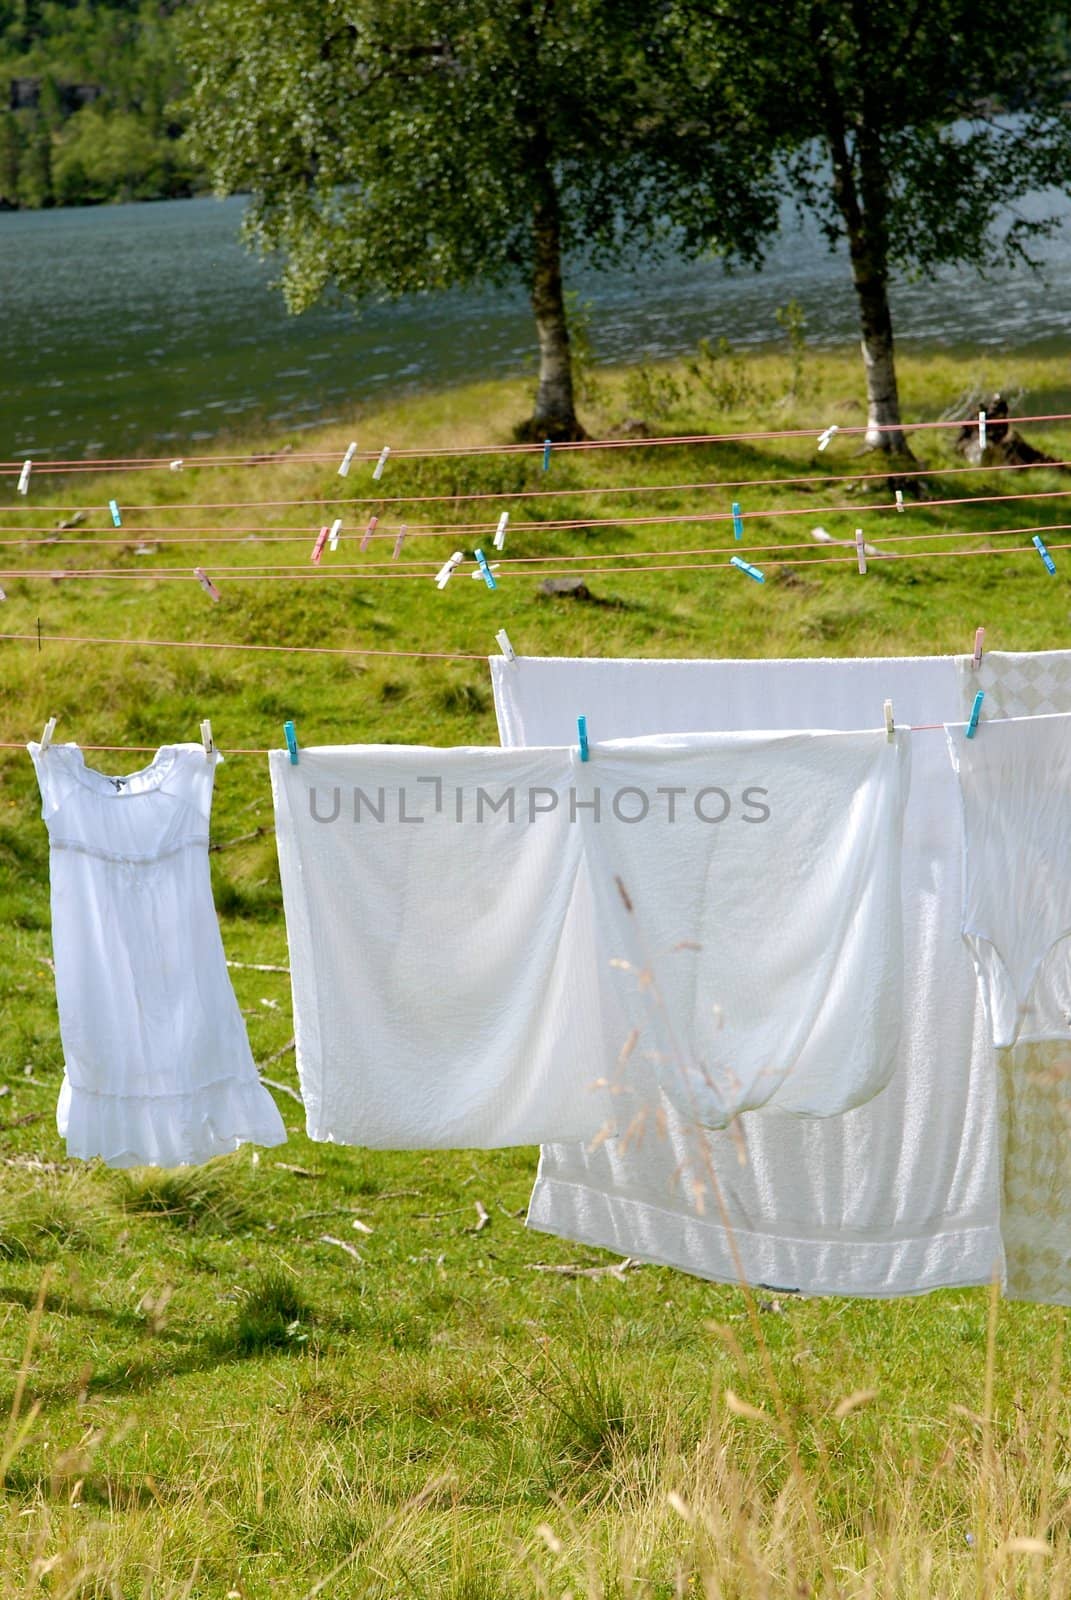 clothes and sheets drying in the garden. Please note: No negative use allowed.